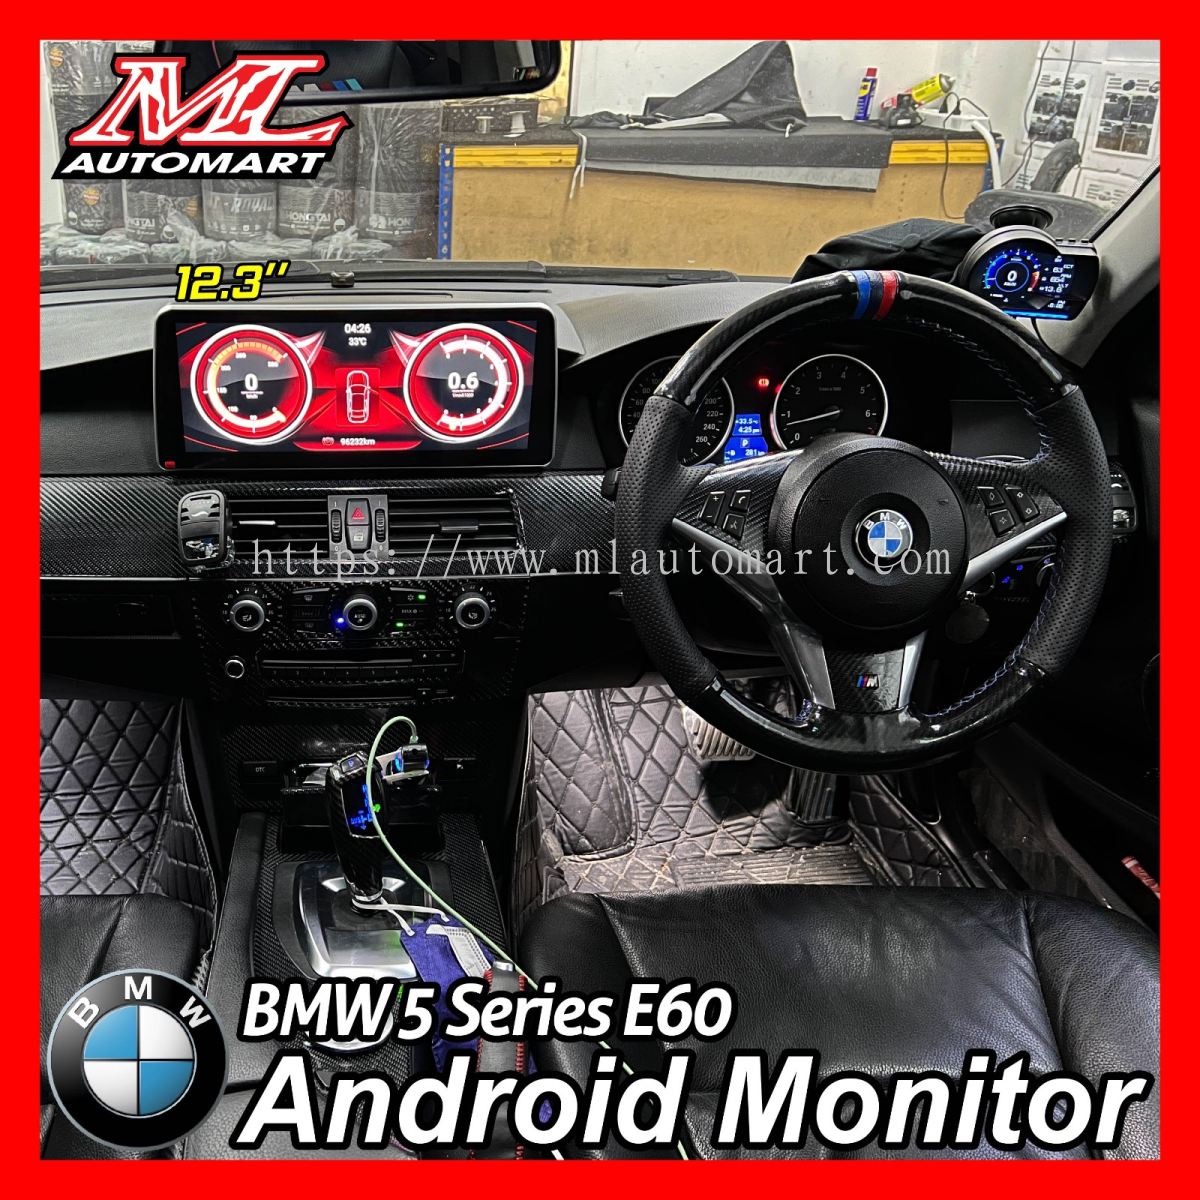 BMW X1 E84 Android Monitor (12.3) (WIthout IDrive) Selangor